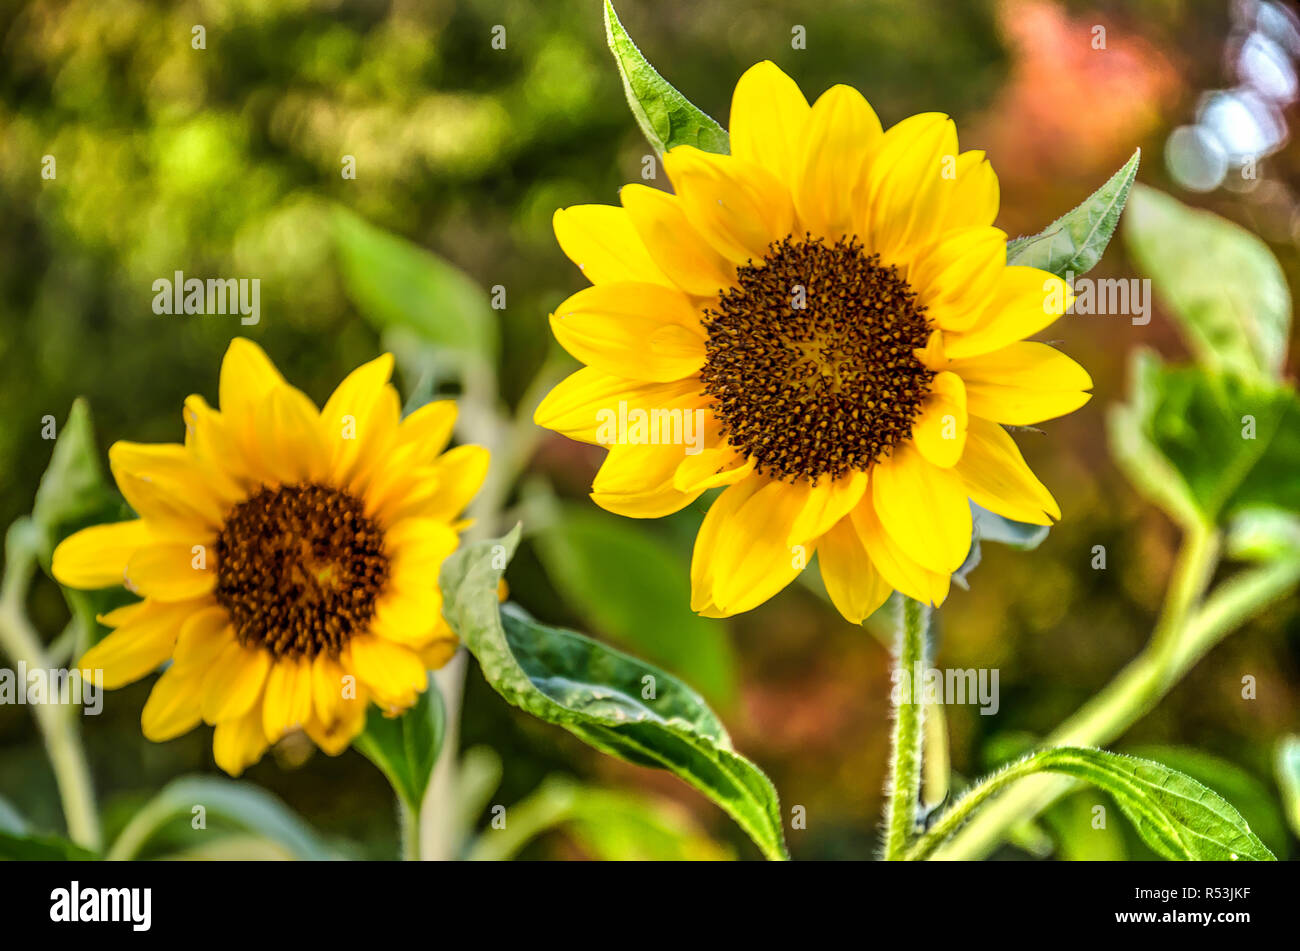 Two sunflowers, one in focus, the other one slightly blurred in the background, in an little urban park in autumn Stock Photo